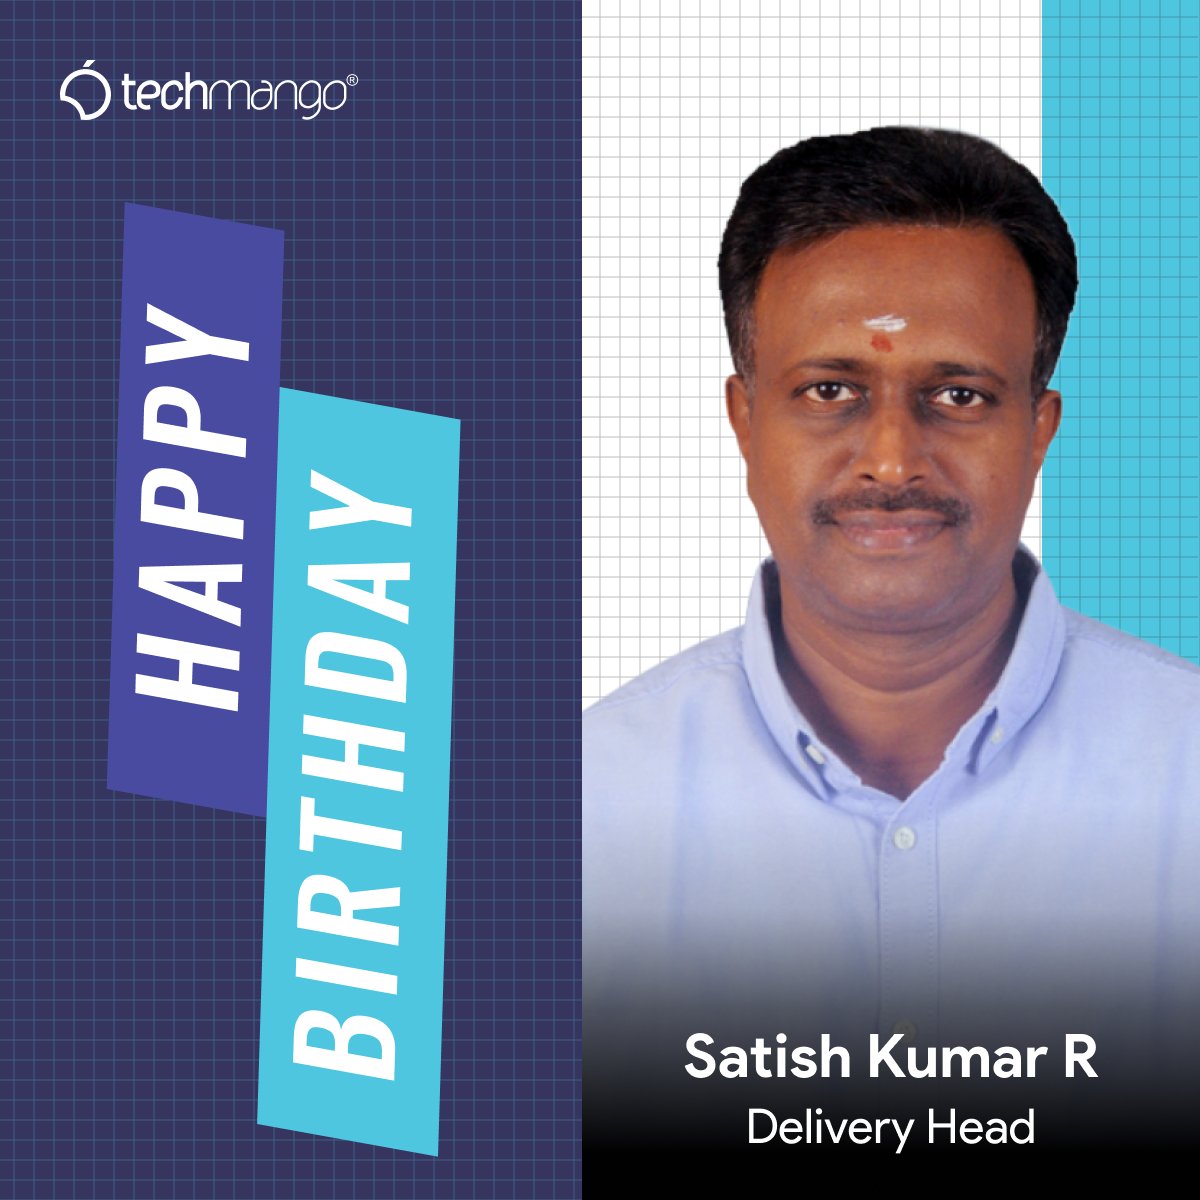 Techmango Wishes Happy Birthday to Satish Kumar Rajagopal Cheers to another fantastic year ahead! May this birthday be the start of your greatest, most wonderful journey yet. #happybirthday #birthdaywishes #birthdaycelebration #birthdayparty #birthdaycheers